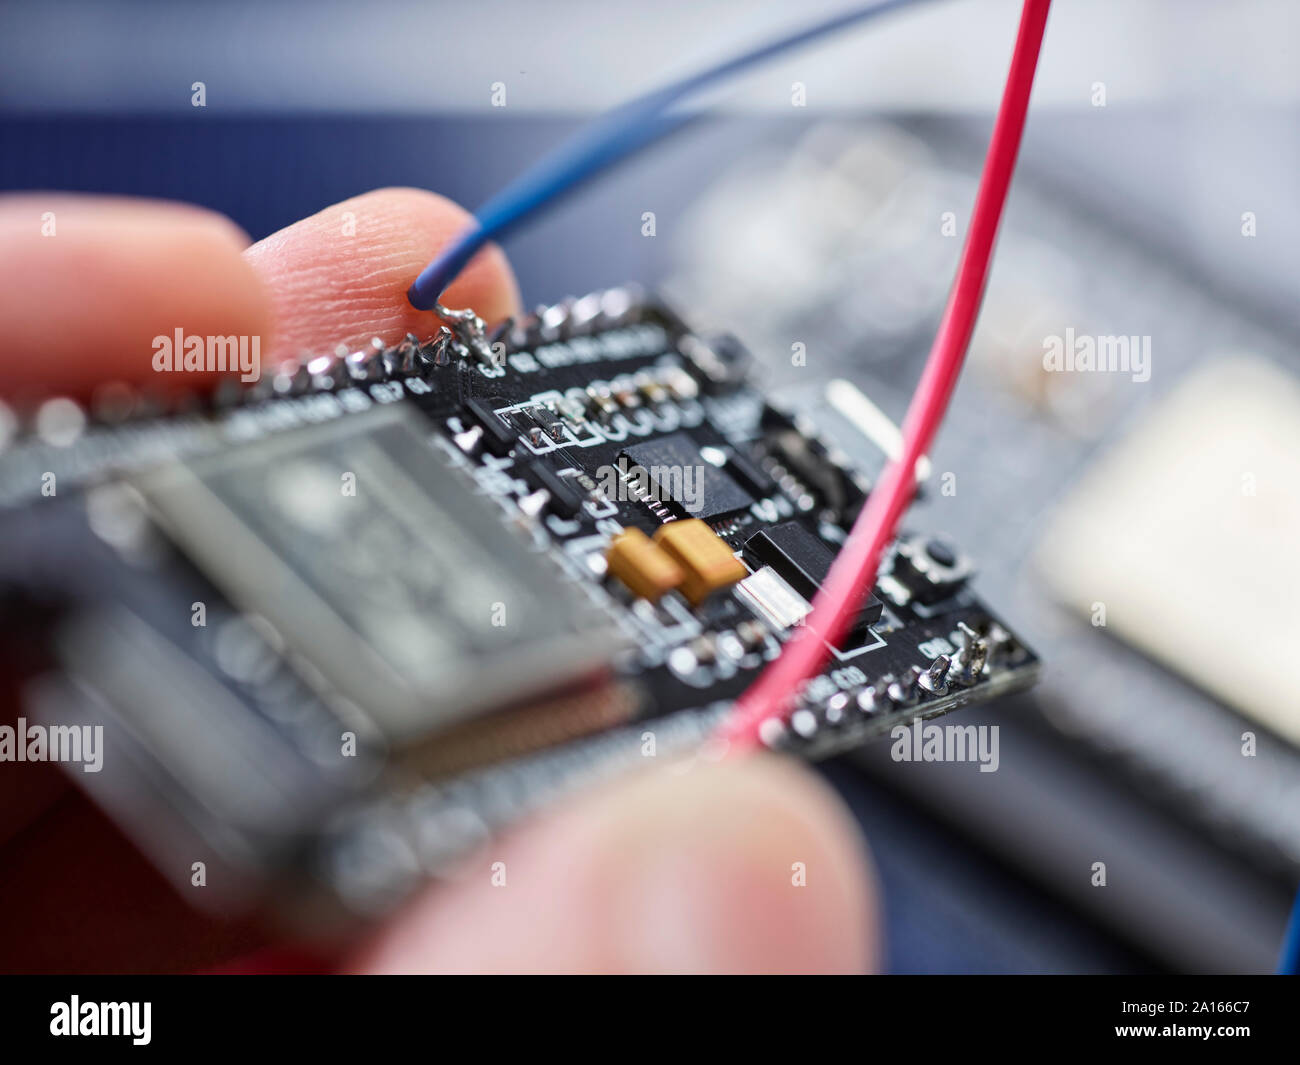 Detail of hand holding circuit board Stock Photo